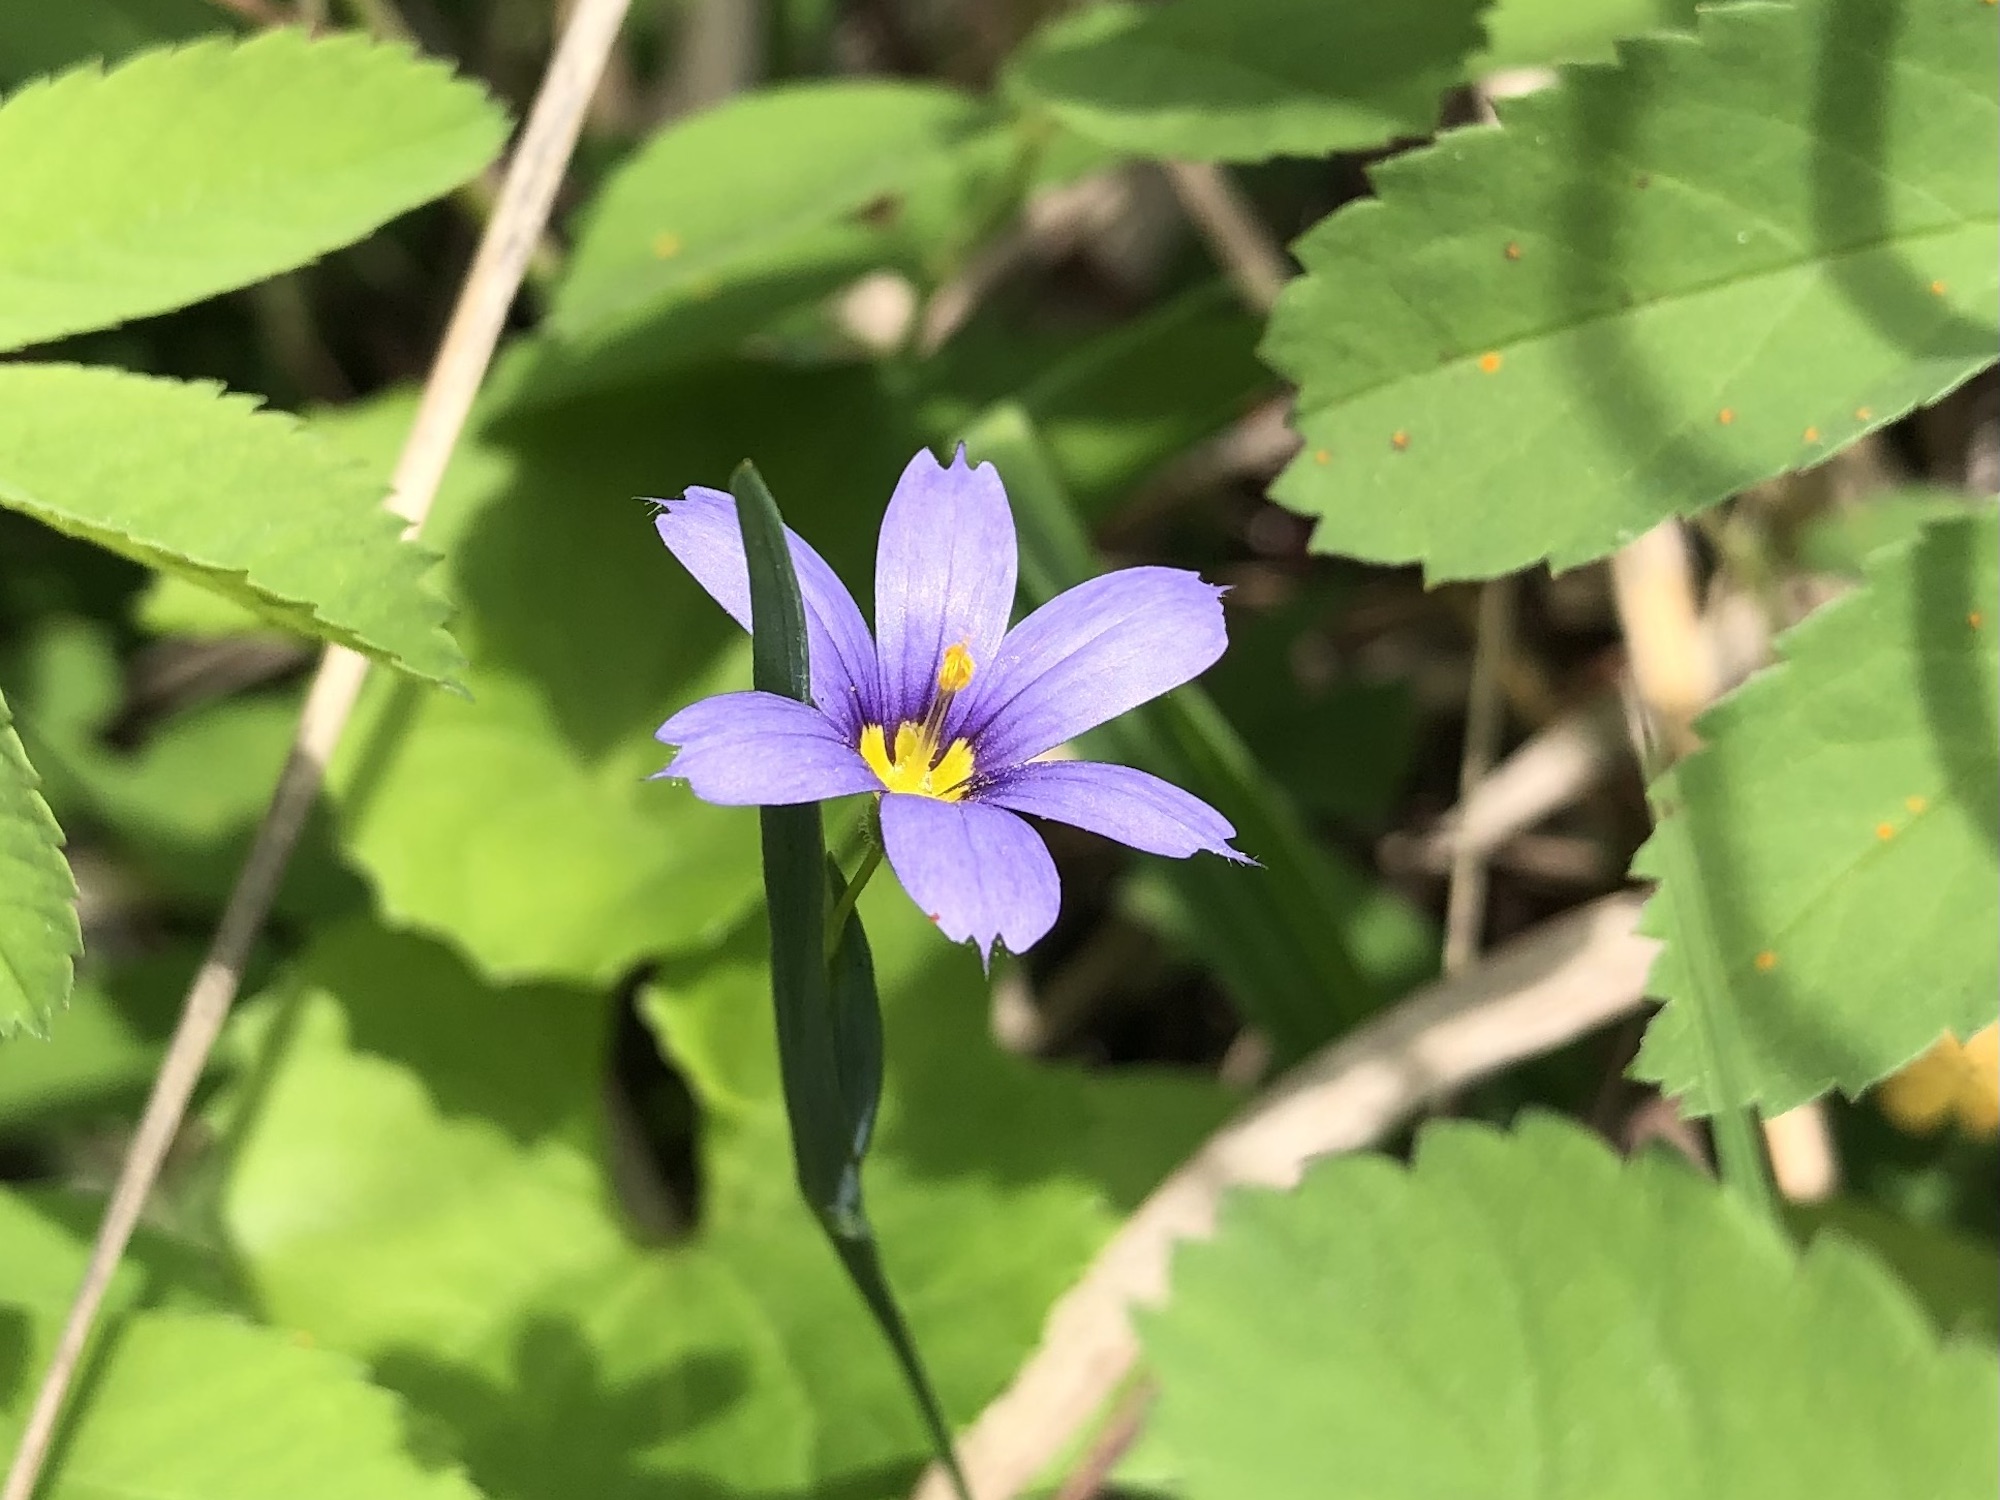 Blue-eyed Grass growing by stone wall by UW Arbortetum Visitors Center in Madison, Wisconsin on May 30, 2022.